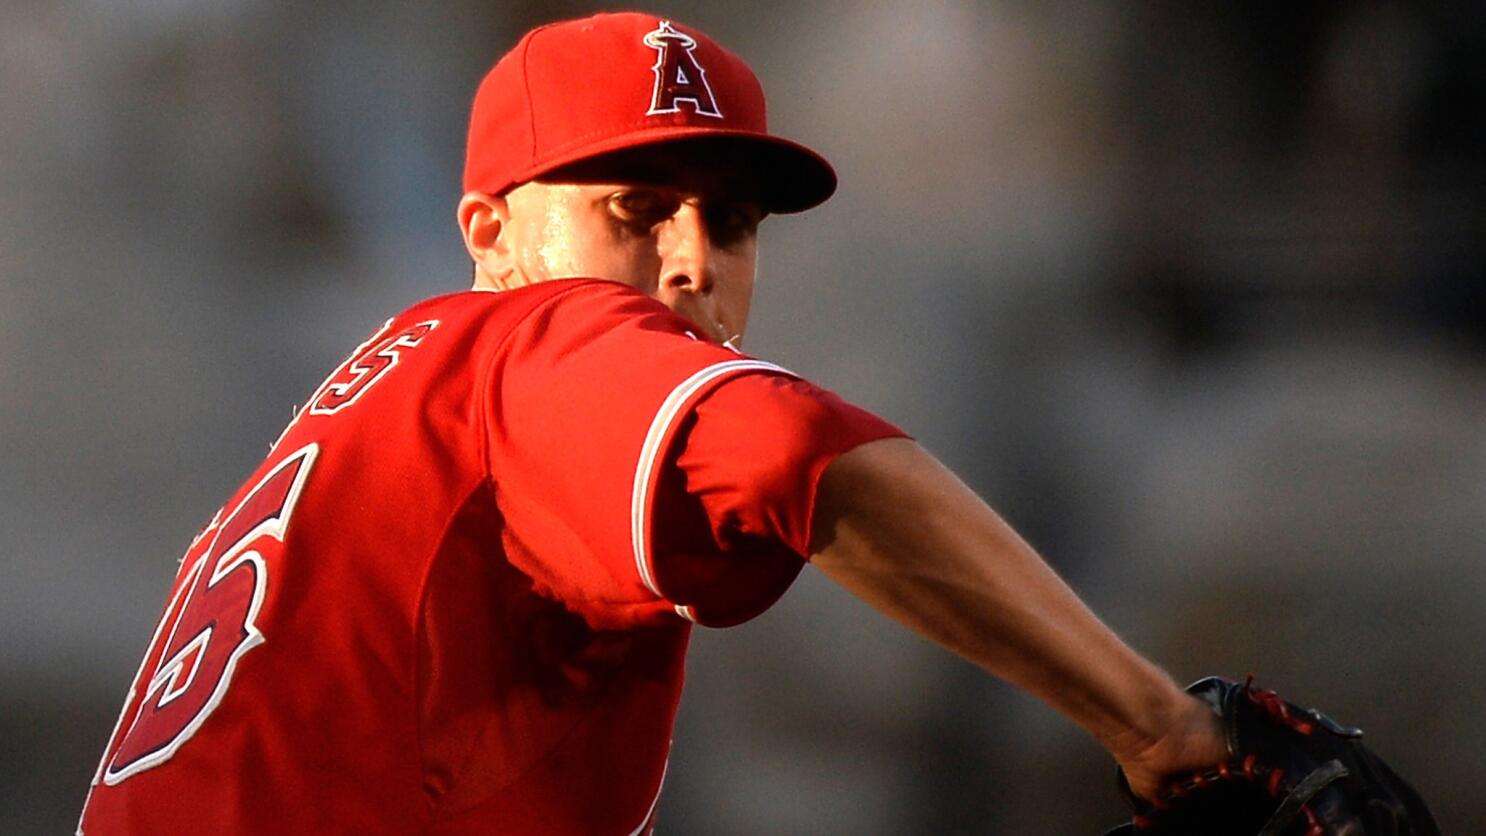 Police say currently no evidence to suggest Angels pitcher Tyler